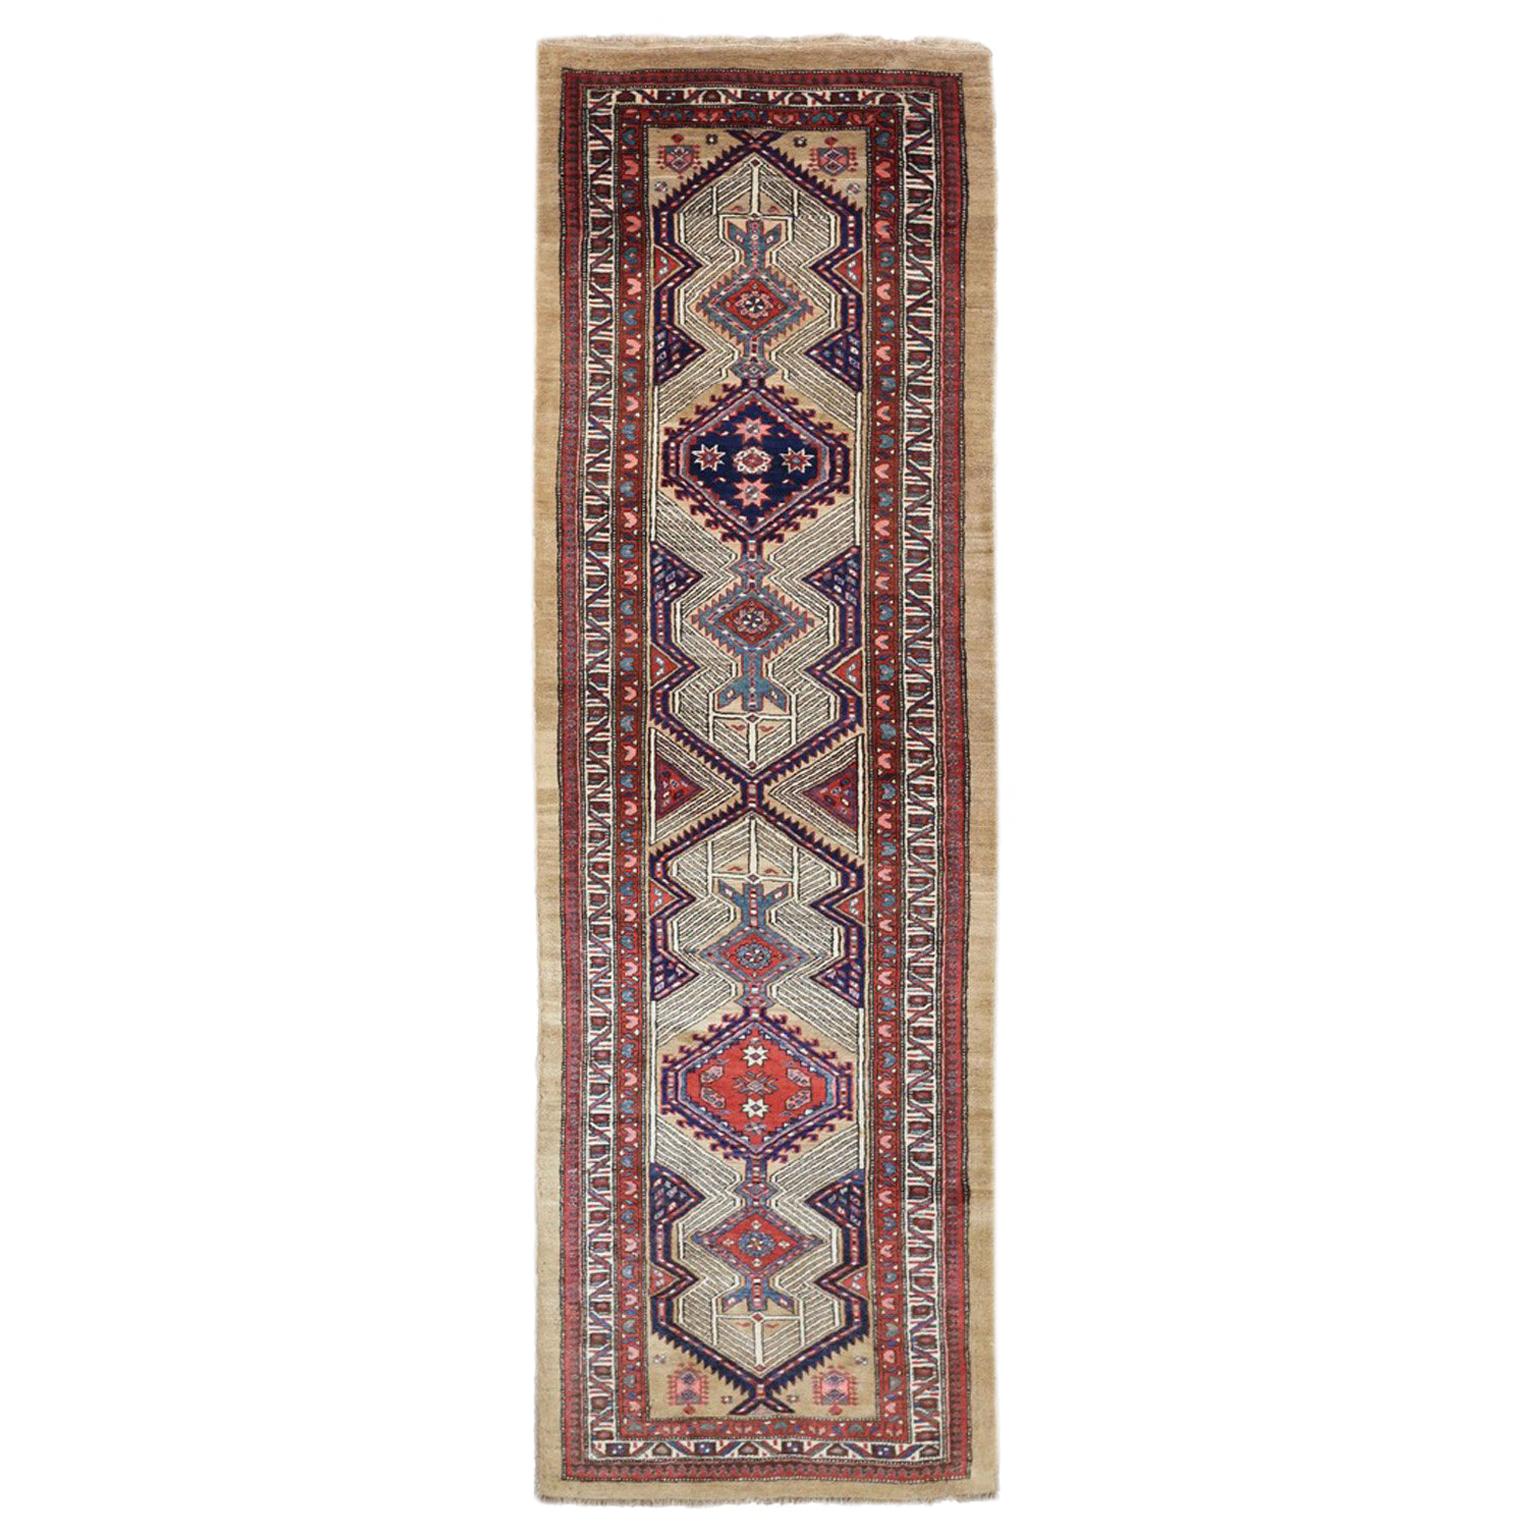 Twin Antique Persian Rug Sarab Style with Special Emblem Design, circa 1930s